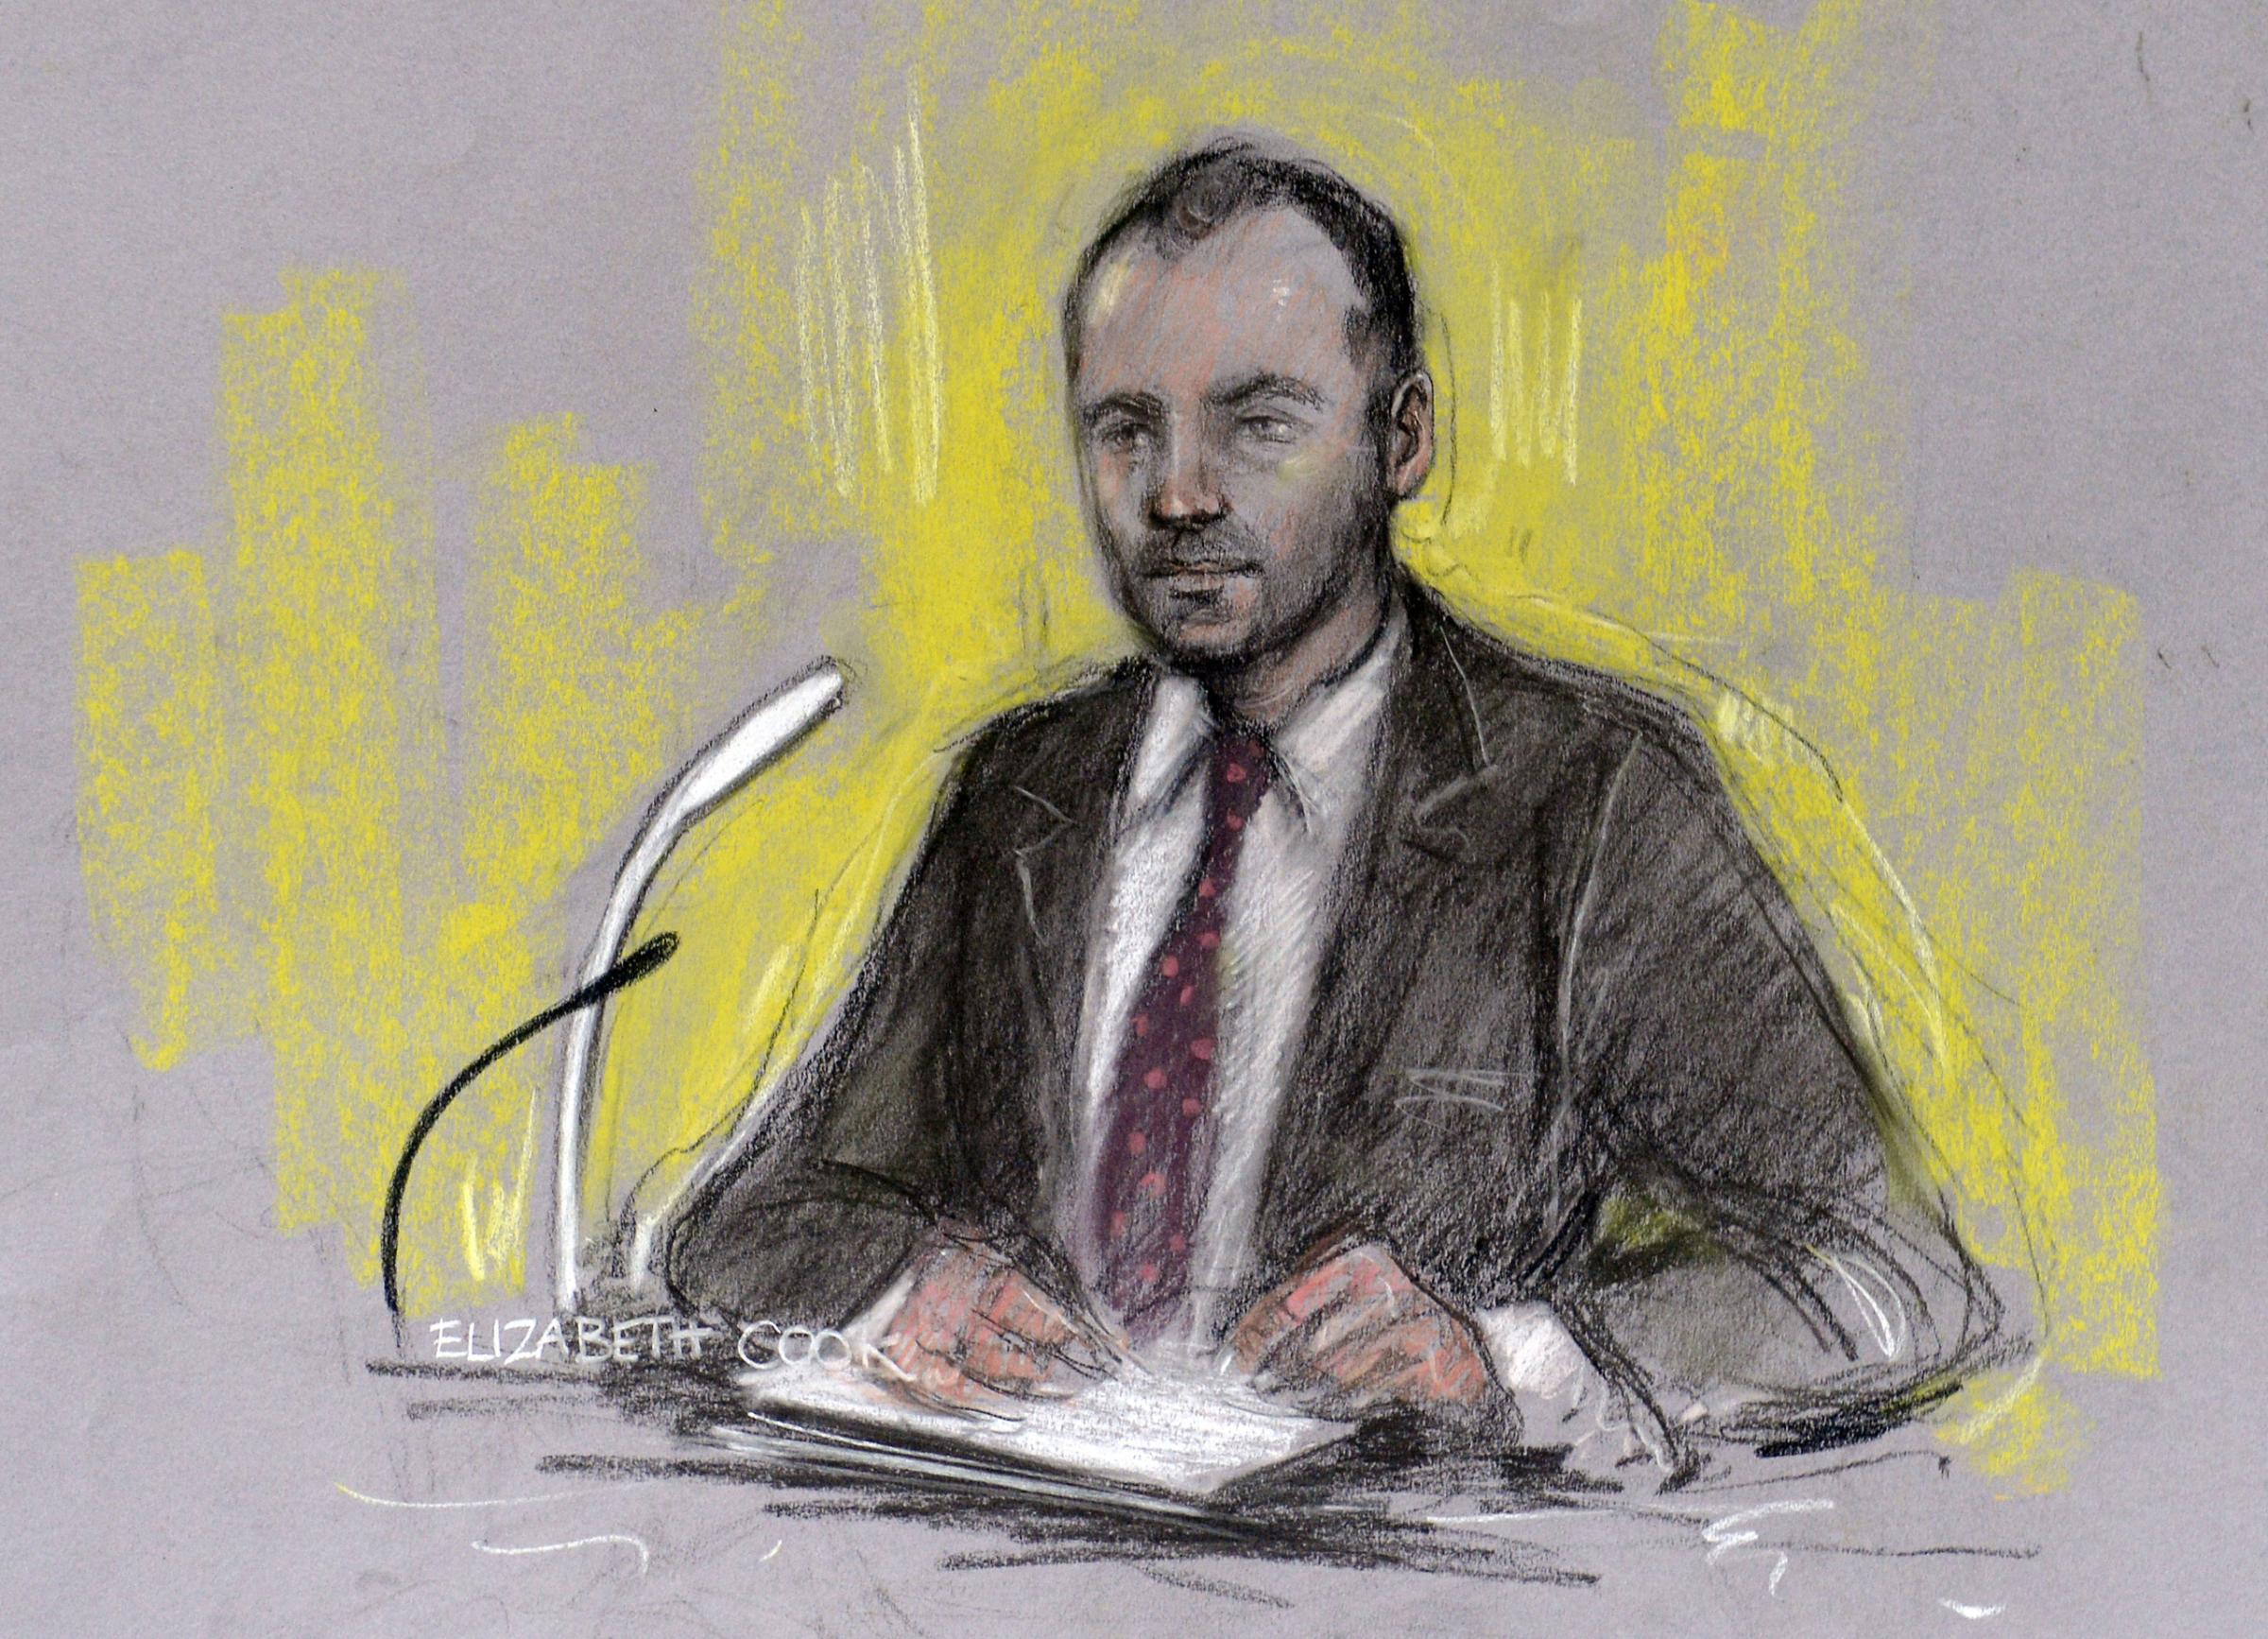 Jude Law News of the World Phone Hacking Trial